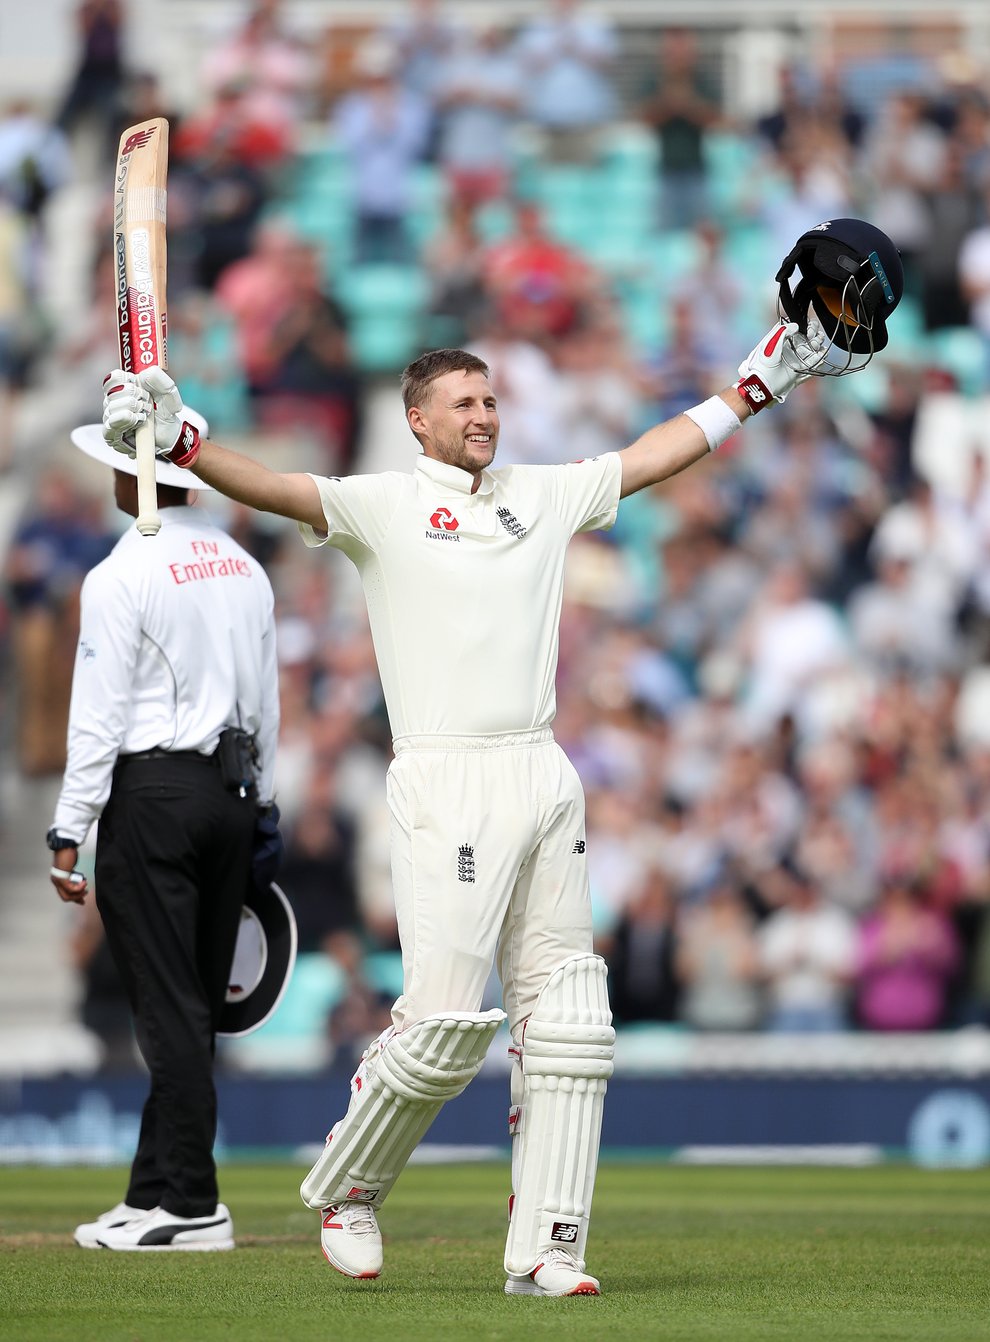 Joe Root celebrated his 100th Test appearance with an unbeaten century (Adam Davy/PA)